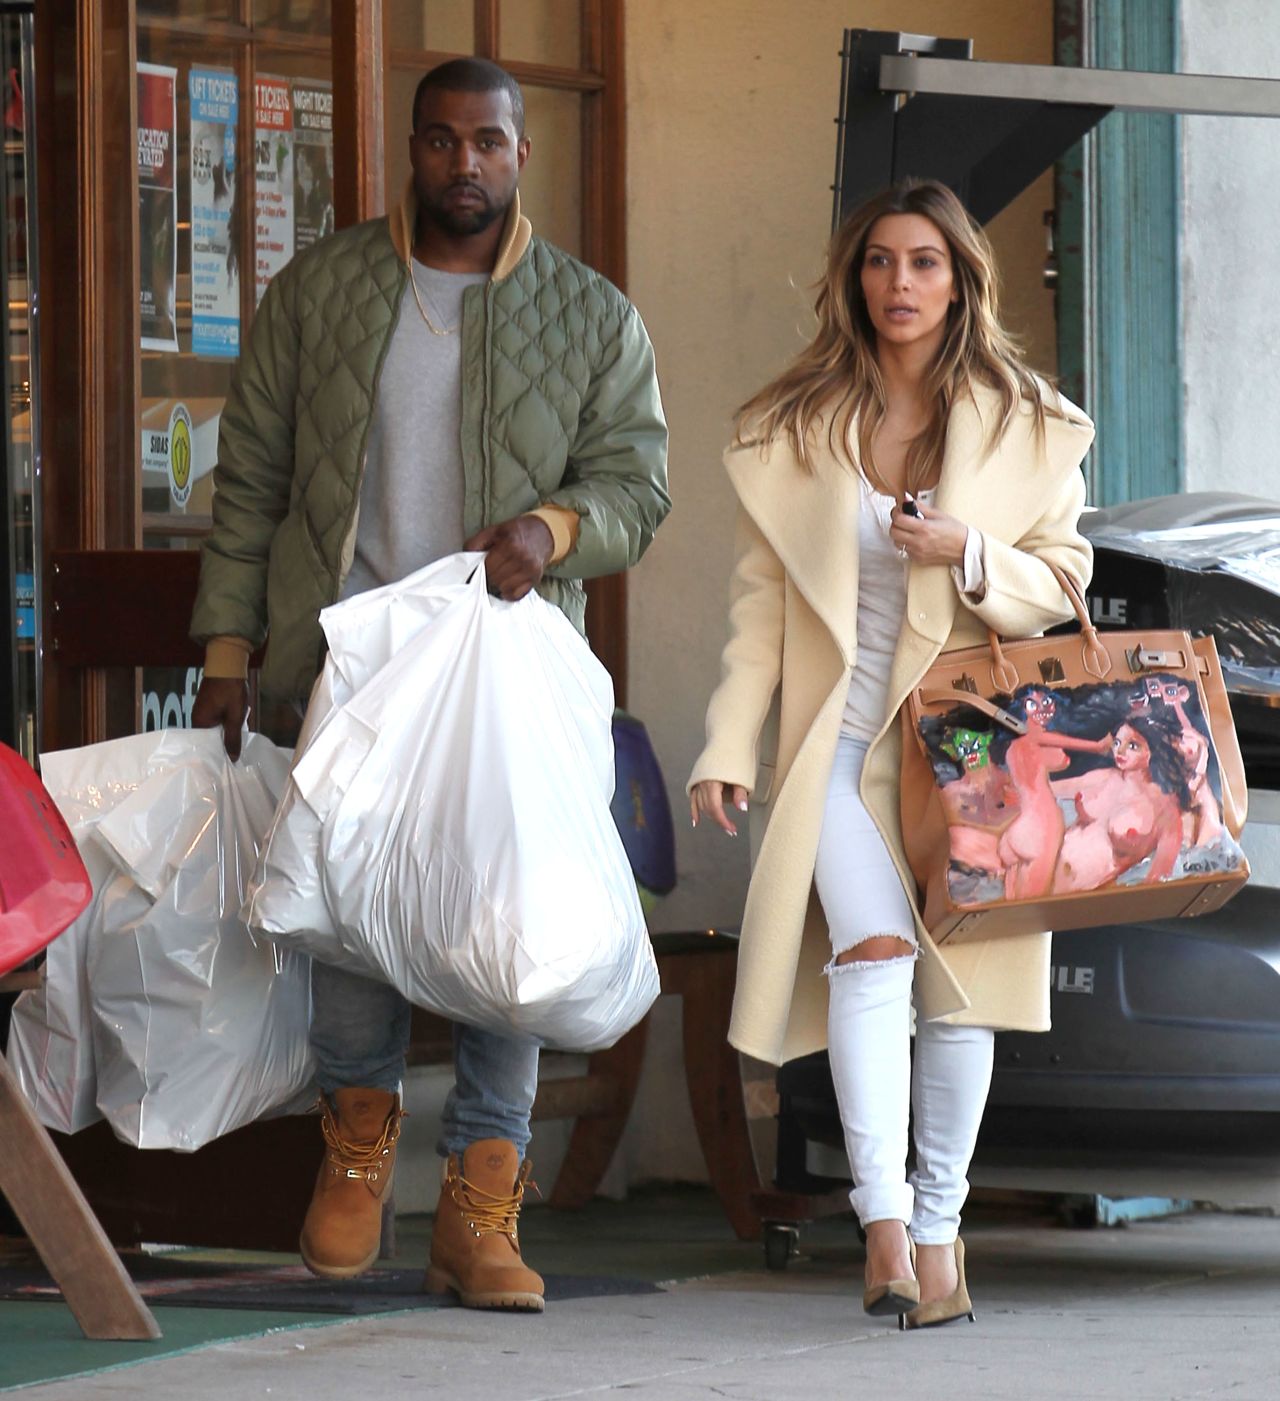  Kanye West  and Kim Kardashian shop at a sporting goods store in Los Angeles on December 26.